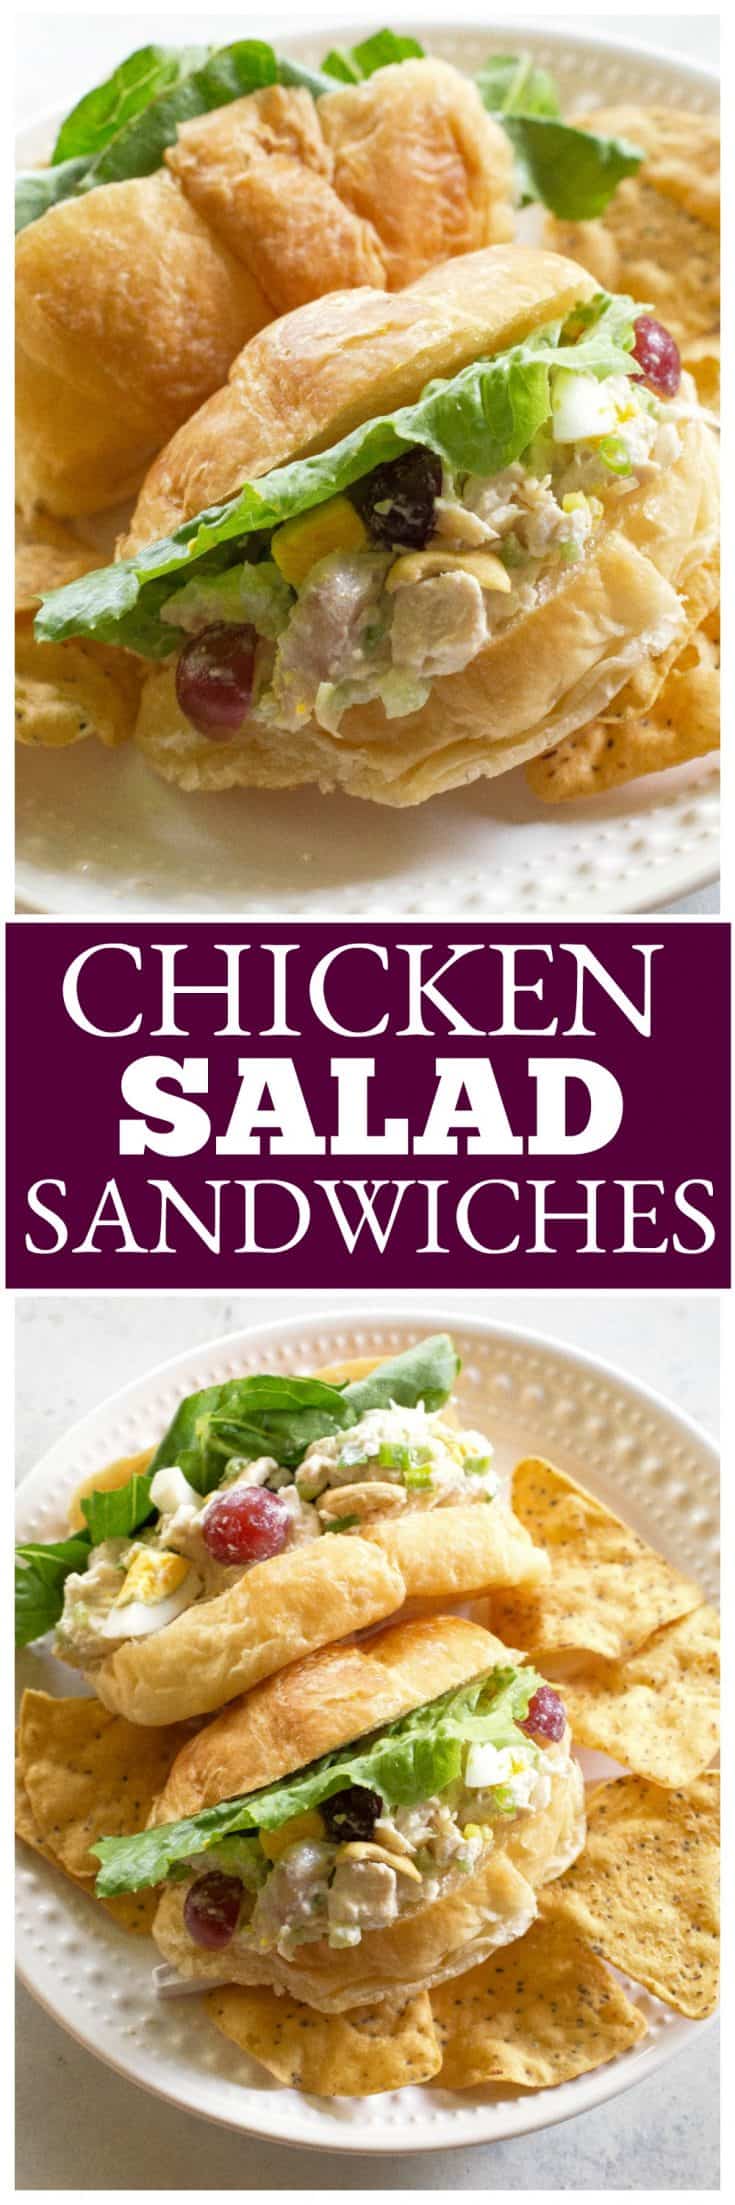 Chicken Salad Sandwiches | The Girl Who Ate Everything